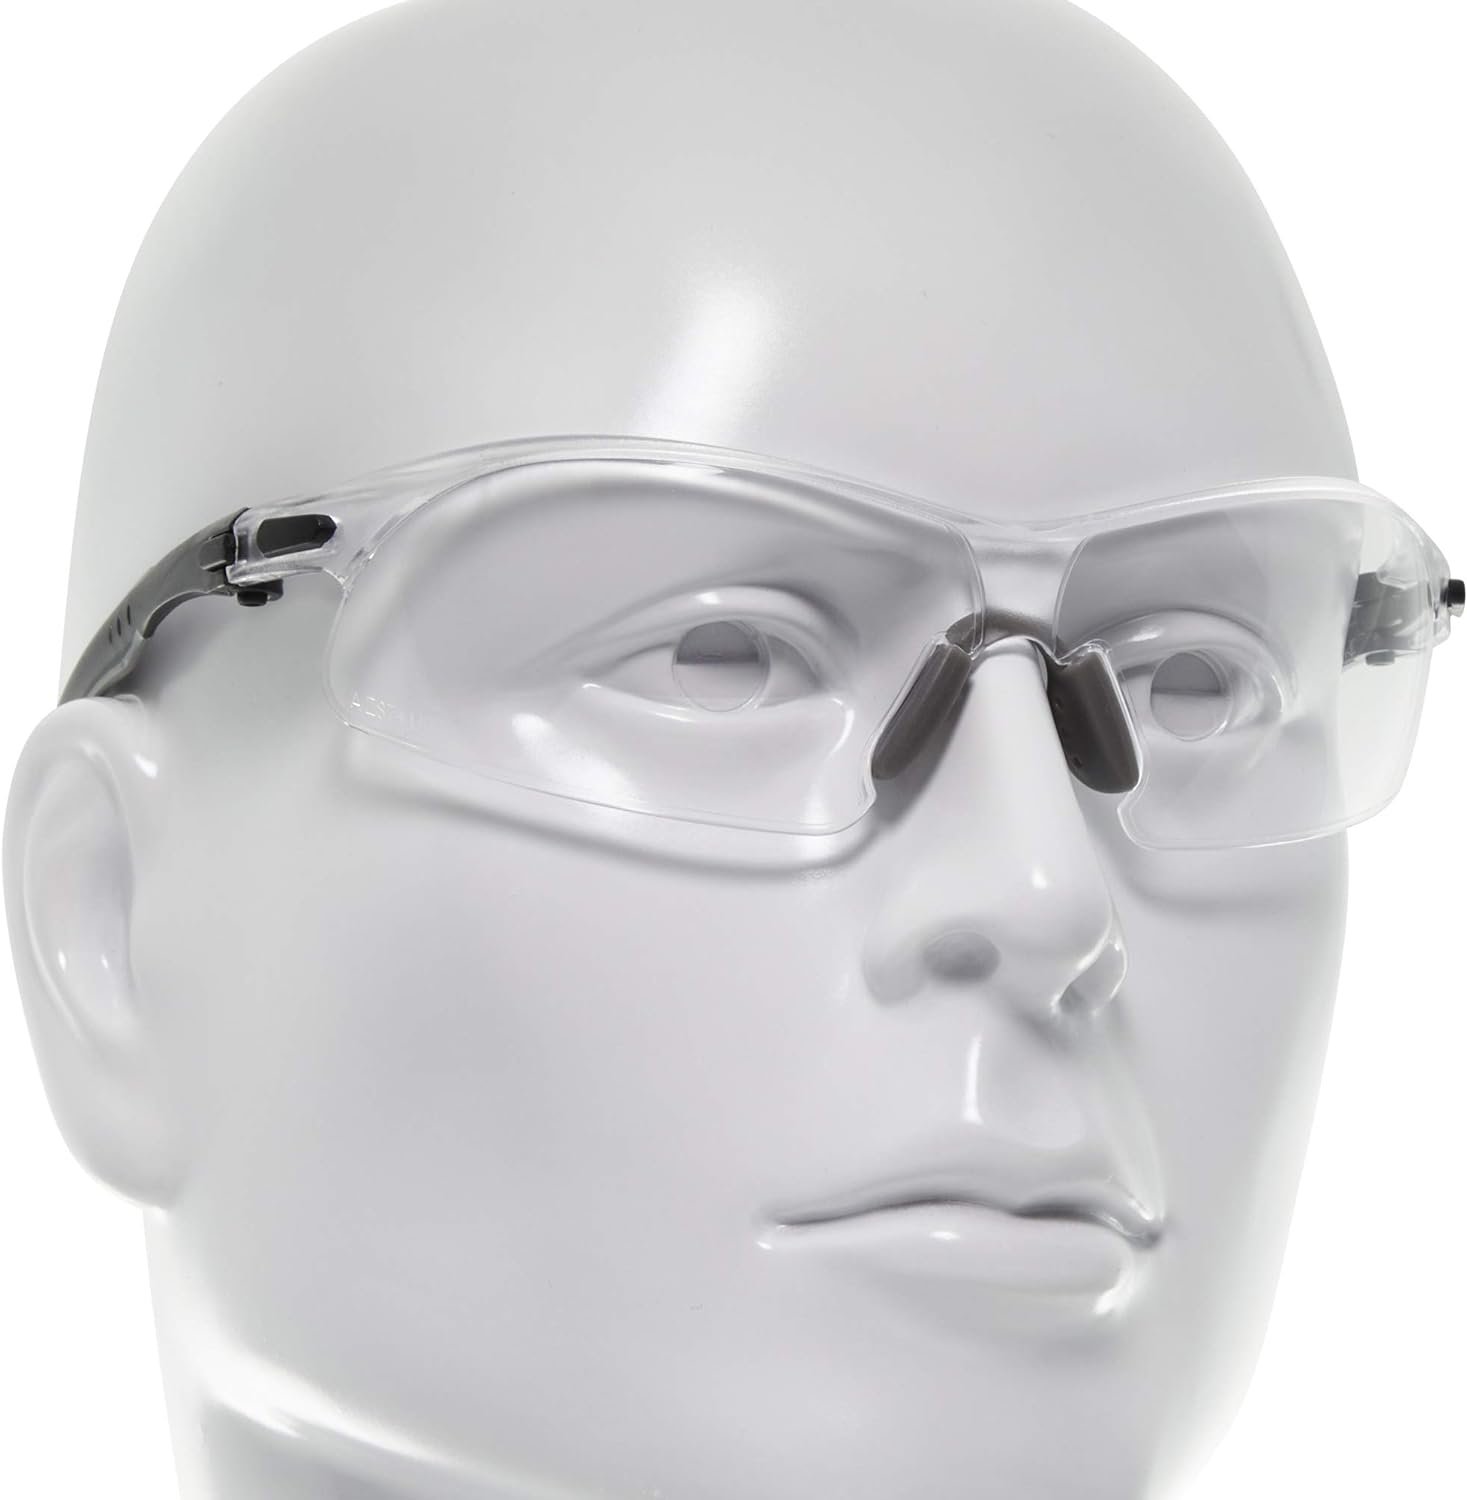 Allen Company Safety Glasses Review